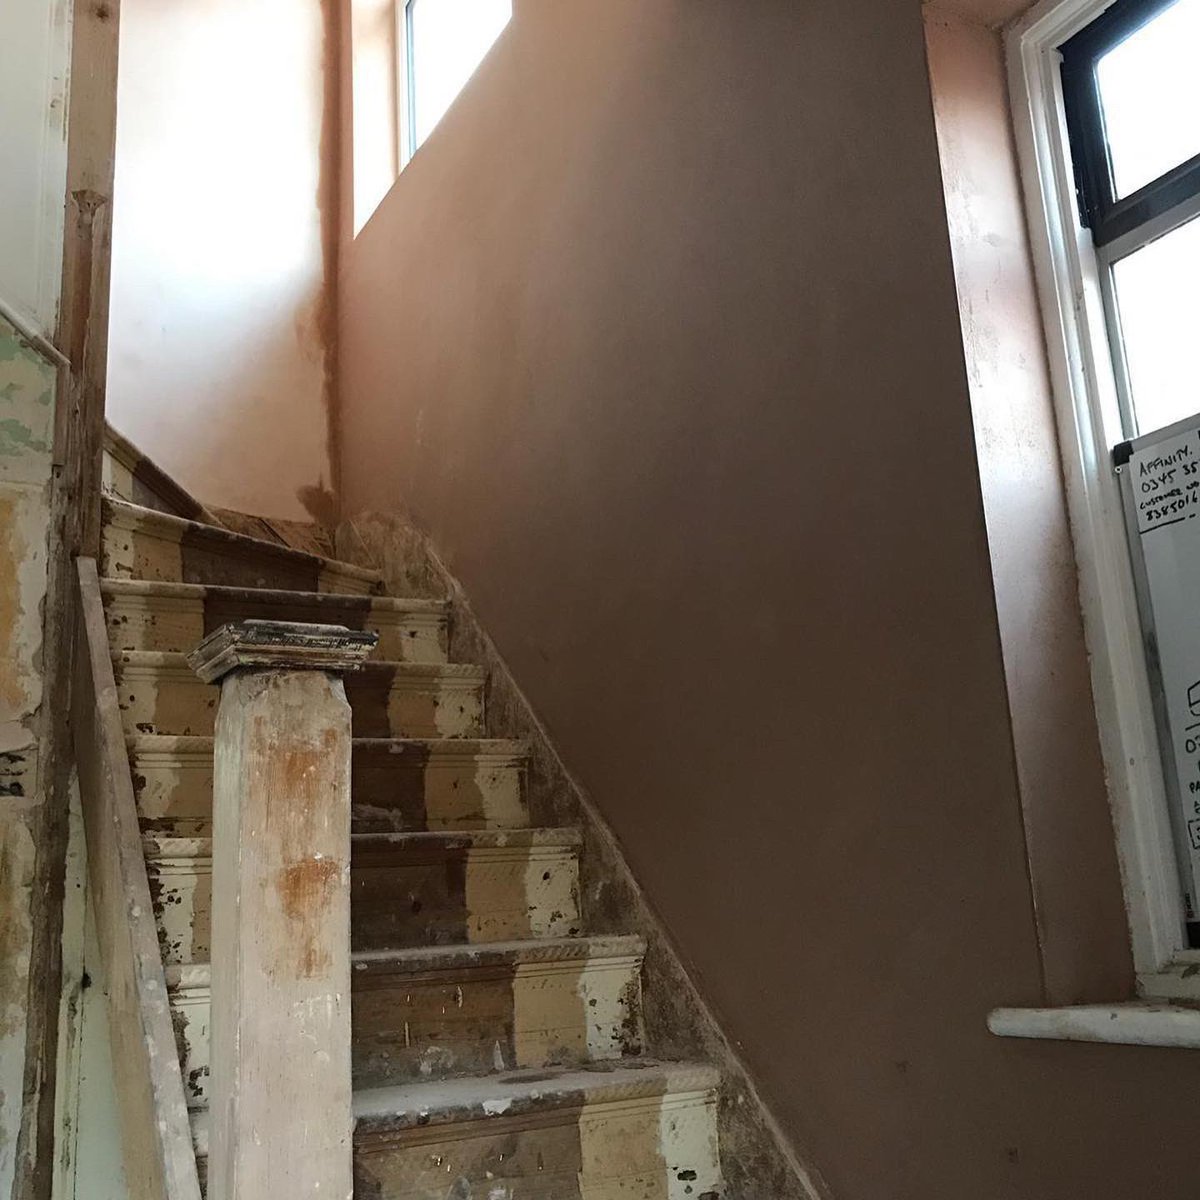 Staircase and hallway refurbishment carried out as part of a full house renovation. When you see changes like this it make the day job so much easier. #carpentry #construction #renovation #refurbishment #hertfordshire #bedfordshire #Buckinghamshire